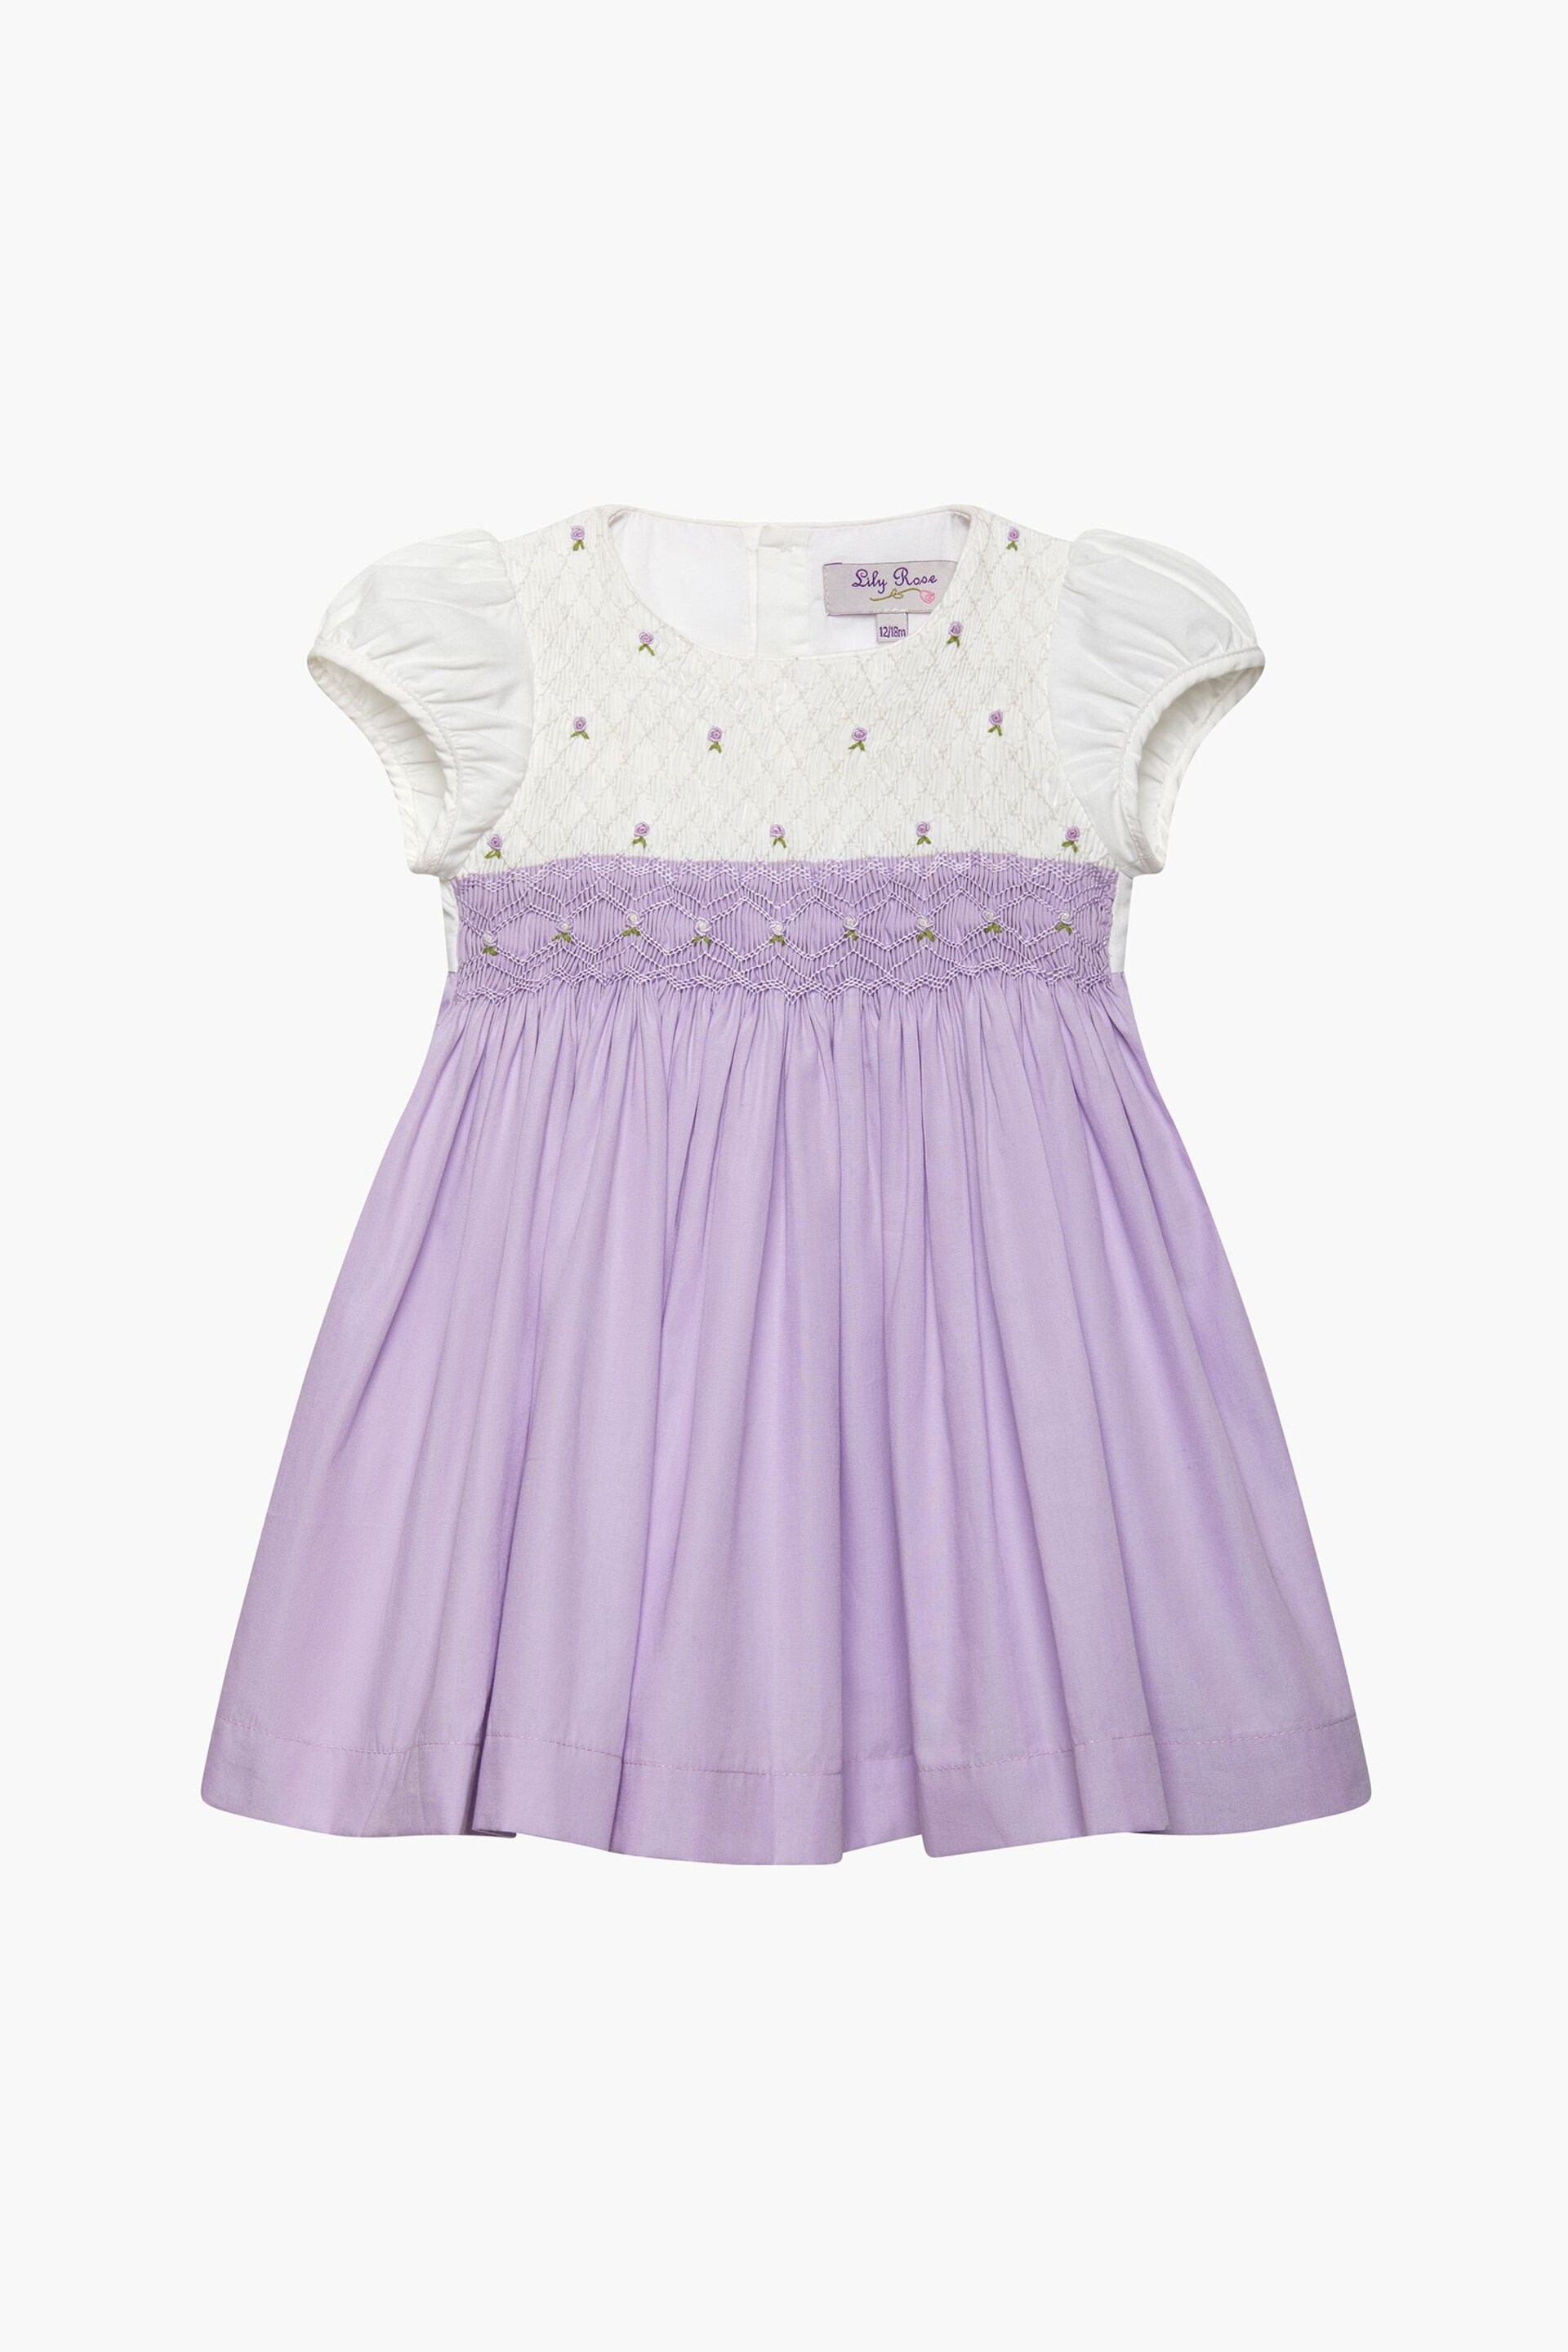 Trotters London Purple Little Rose Hand Smocked Cotton Dress - Image 2 of 4